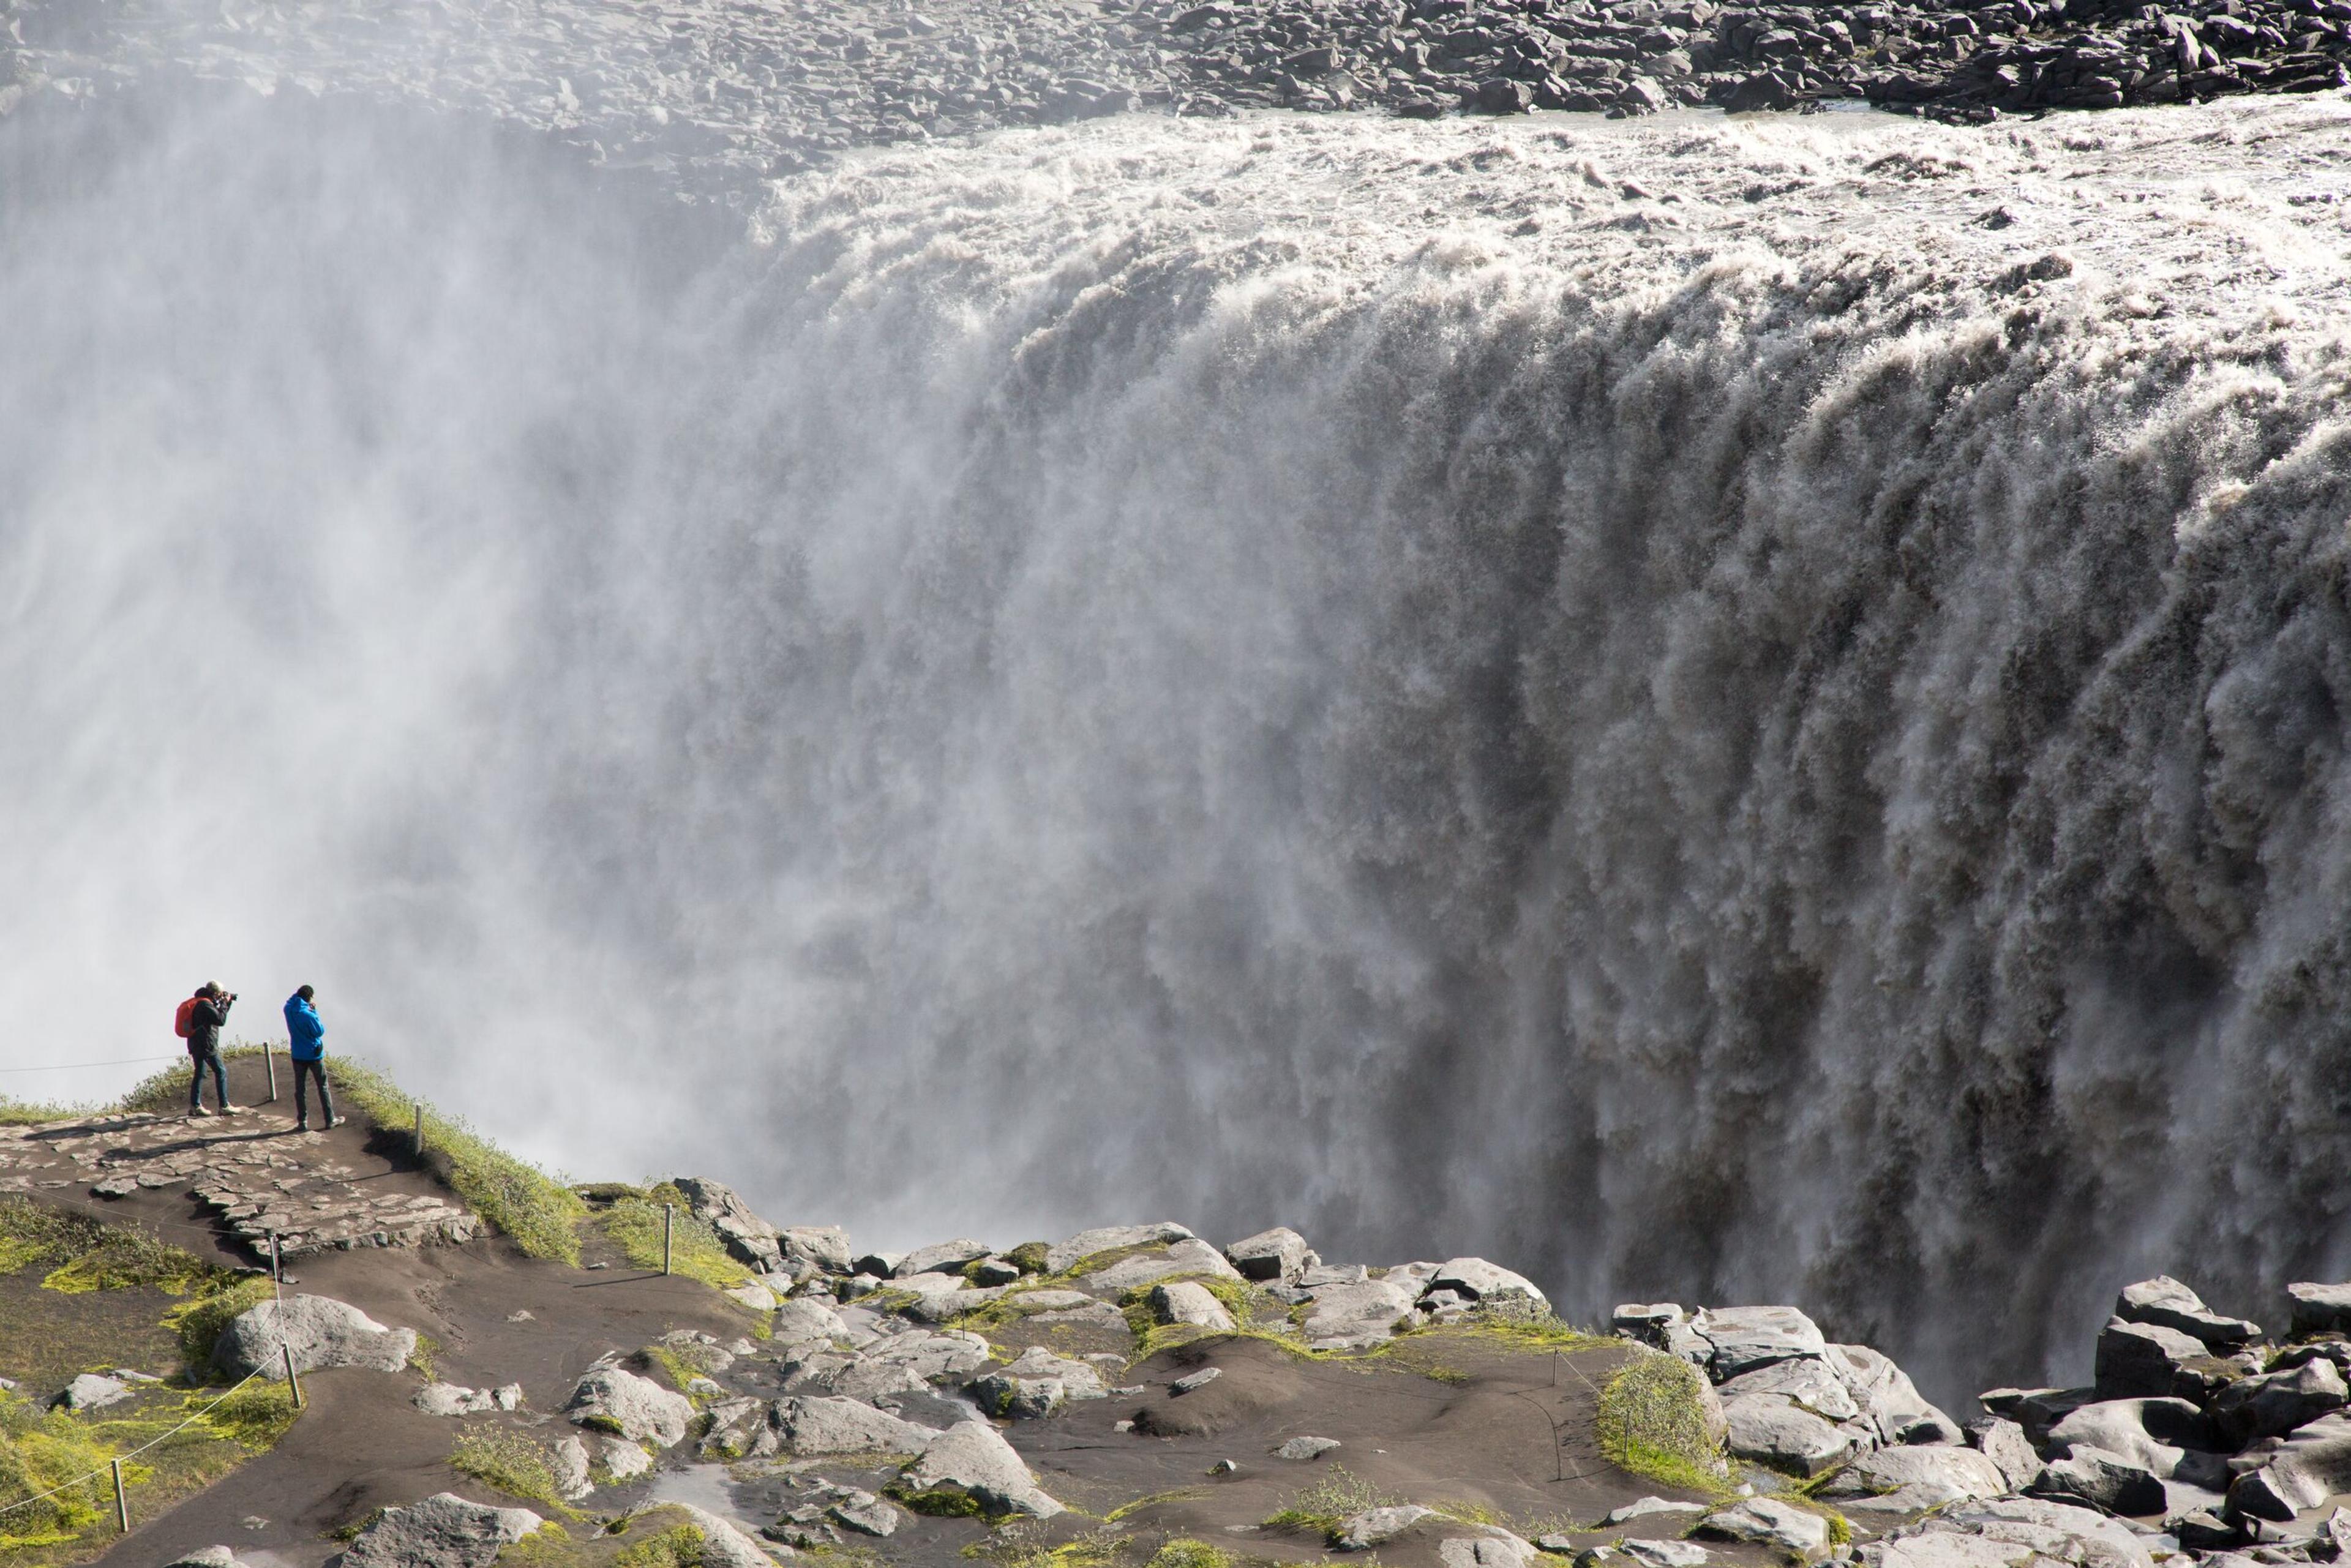 Two individuals capturing photos of Dettifoss, recognized as the most powerful waterfall in Iceland.